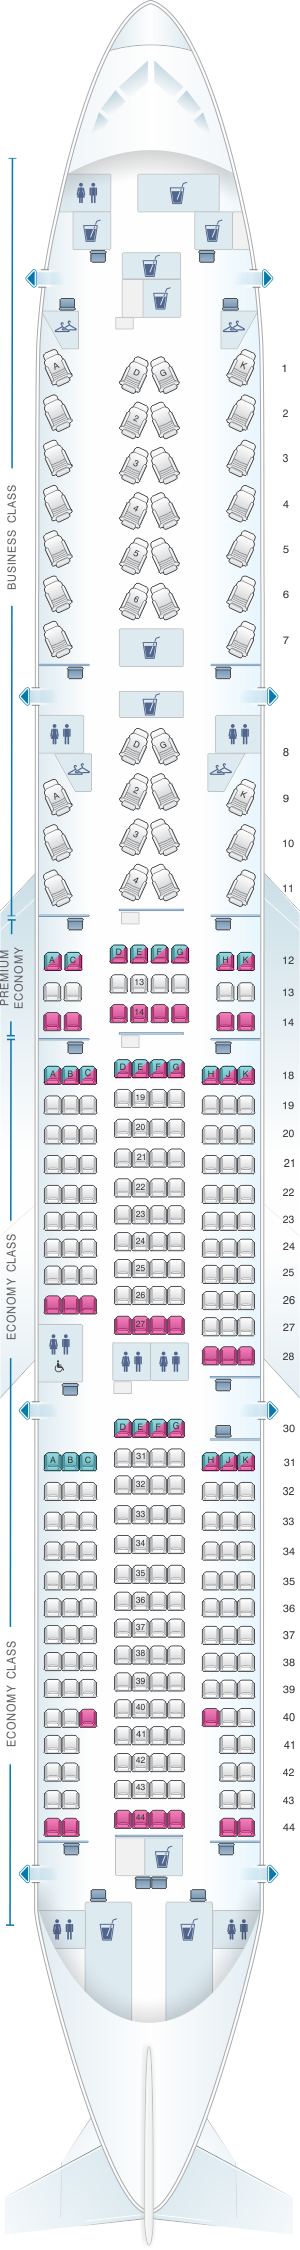 seat assignment sby air canada